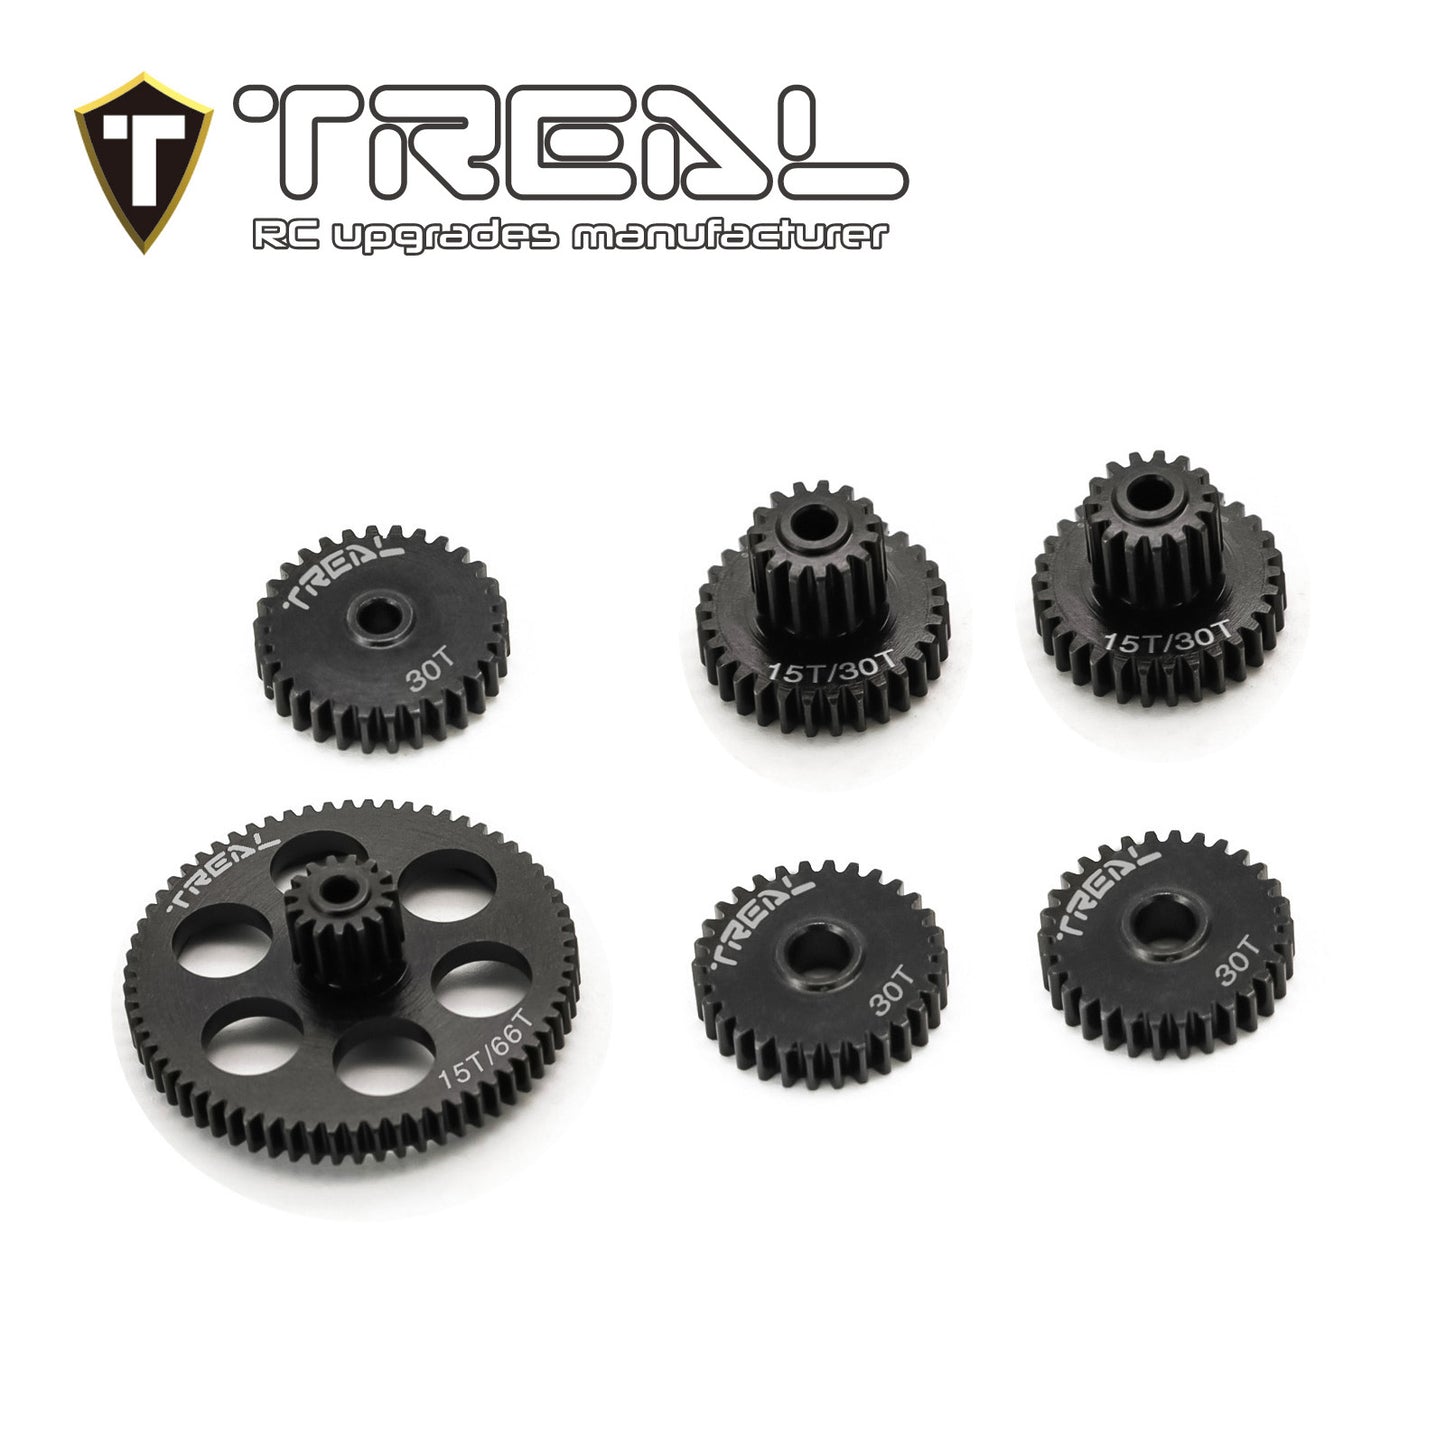 TREAL FCX24 Transmission Gears Set, Hardened Steel Trans Gears for FMS 1/24 FCX24 Power Wagon